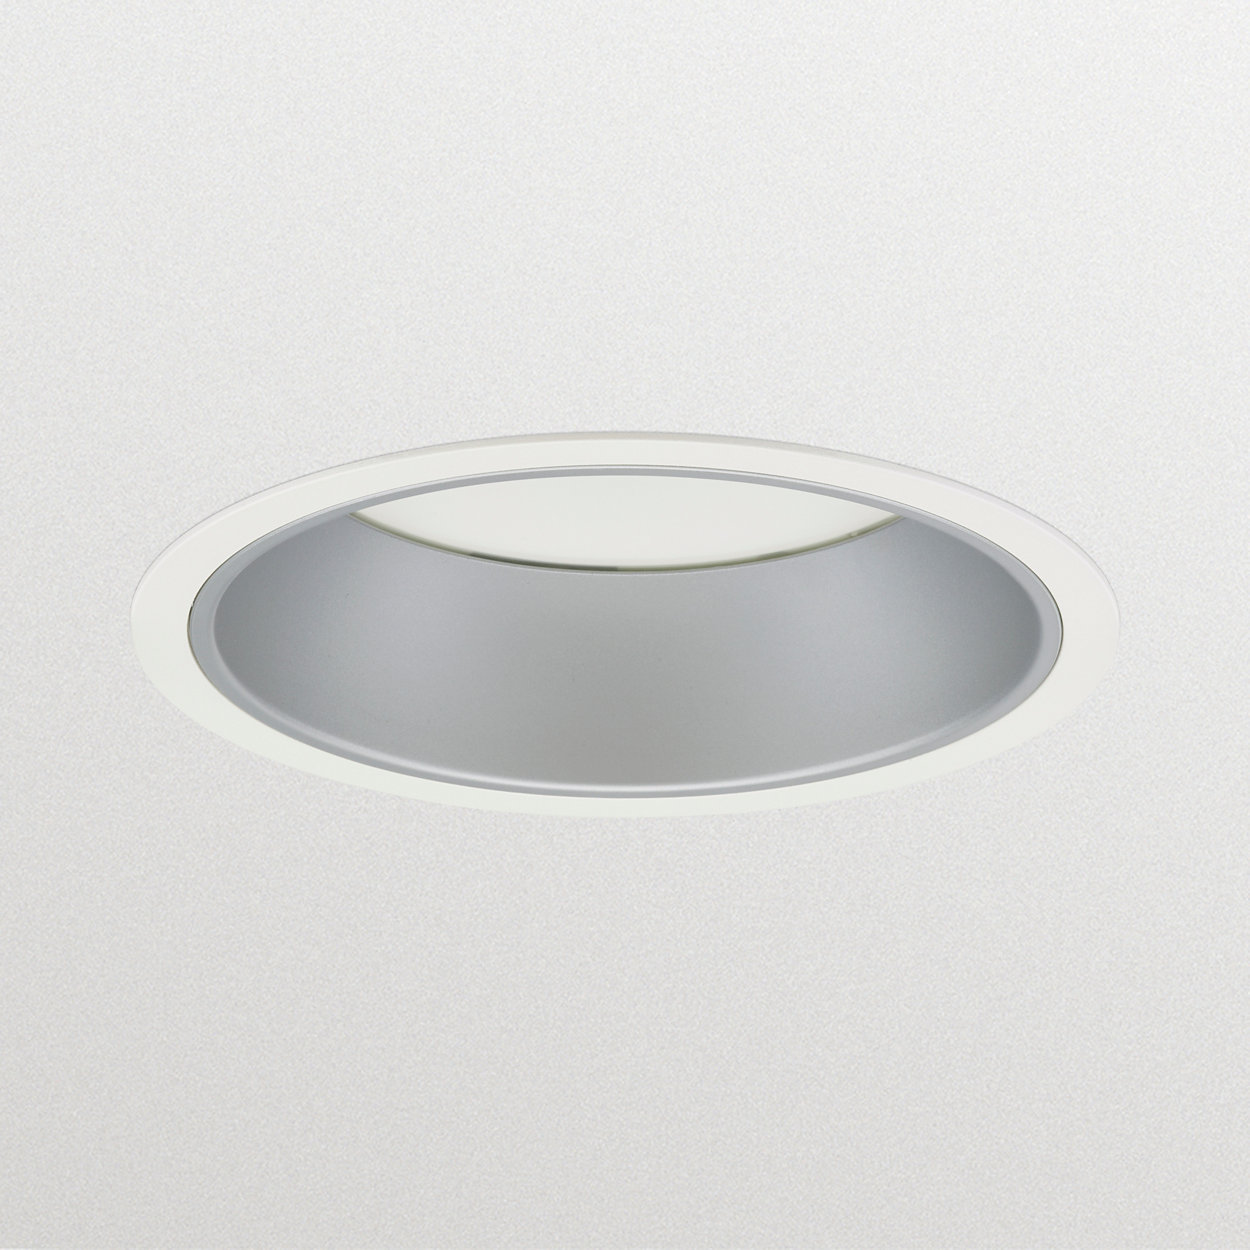 LuxSpace recessed – high efficiency, visual comfort and a stylish design